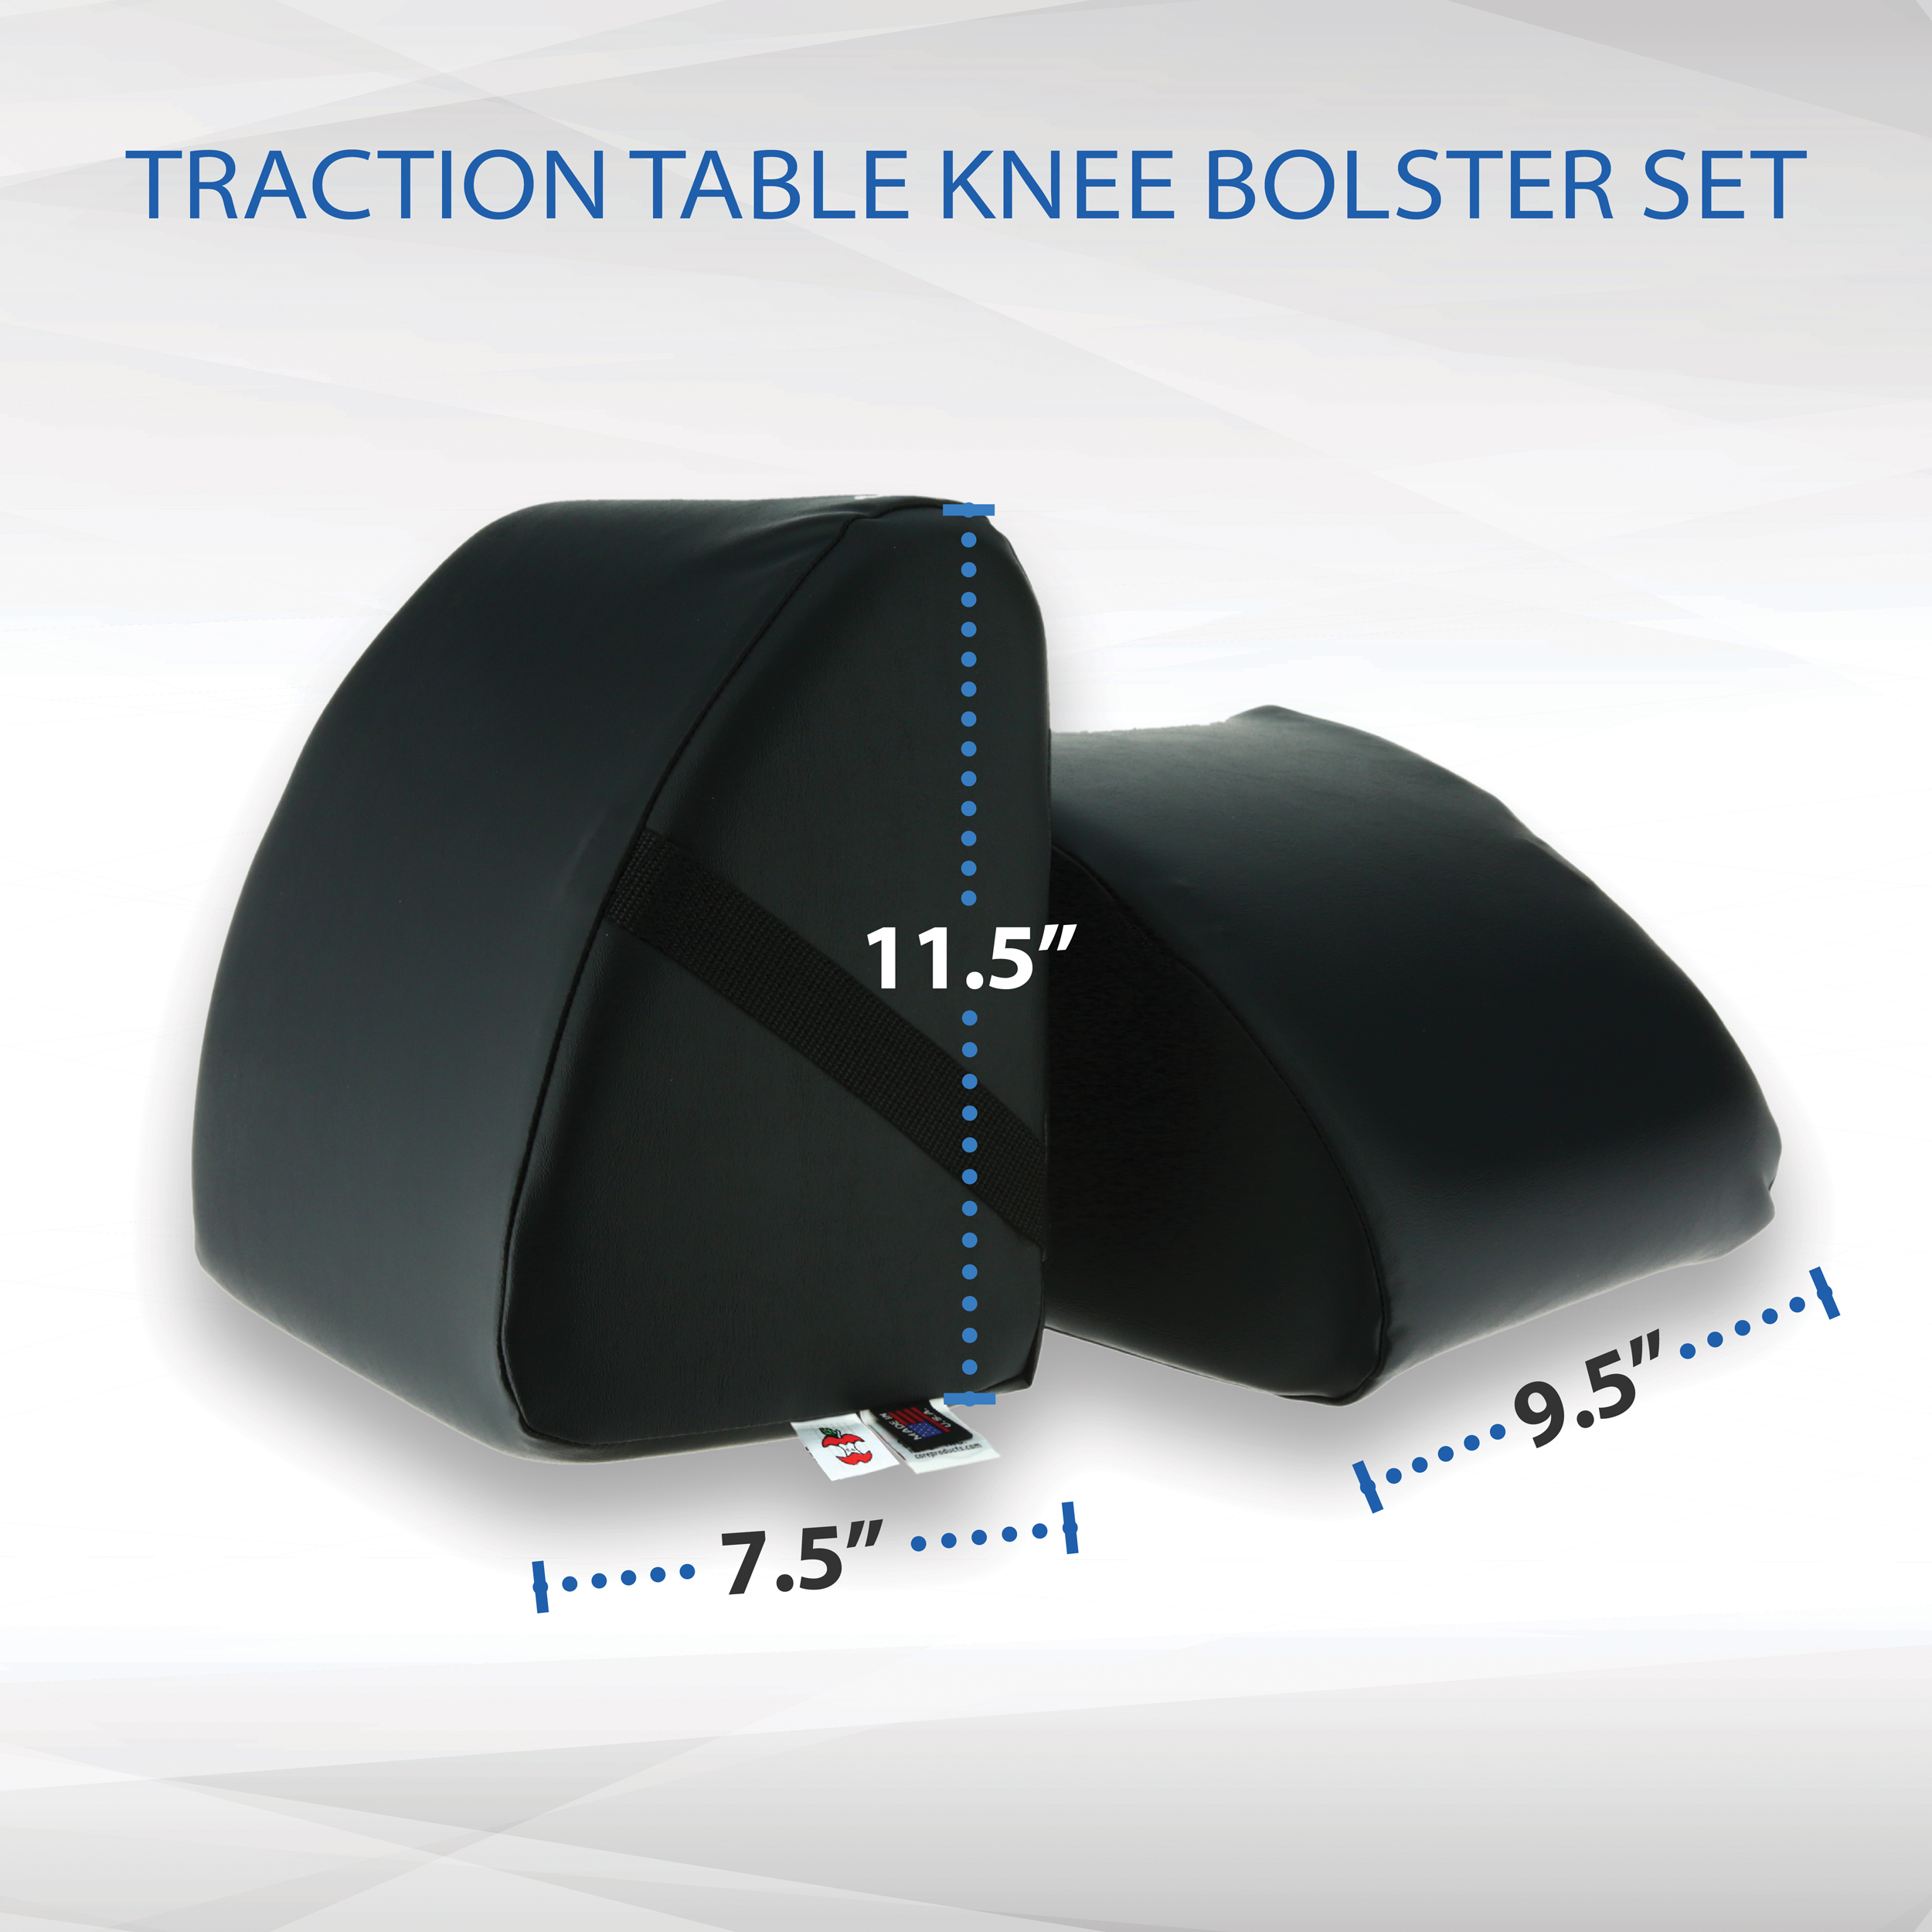 Knee Bolster and Extension Set - Each